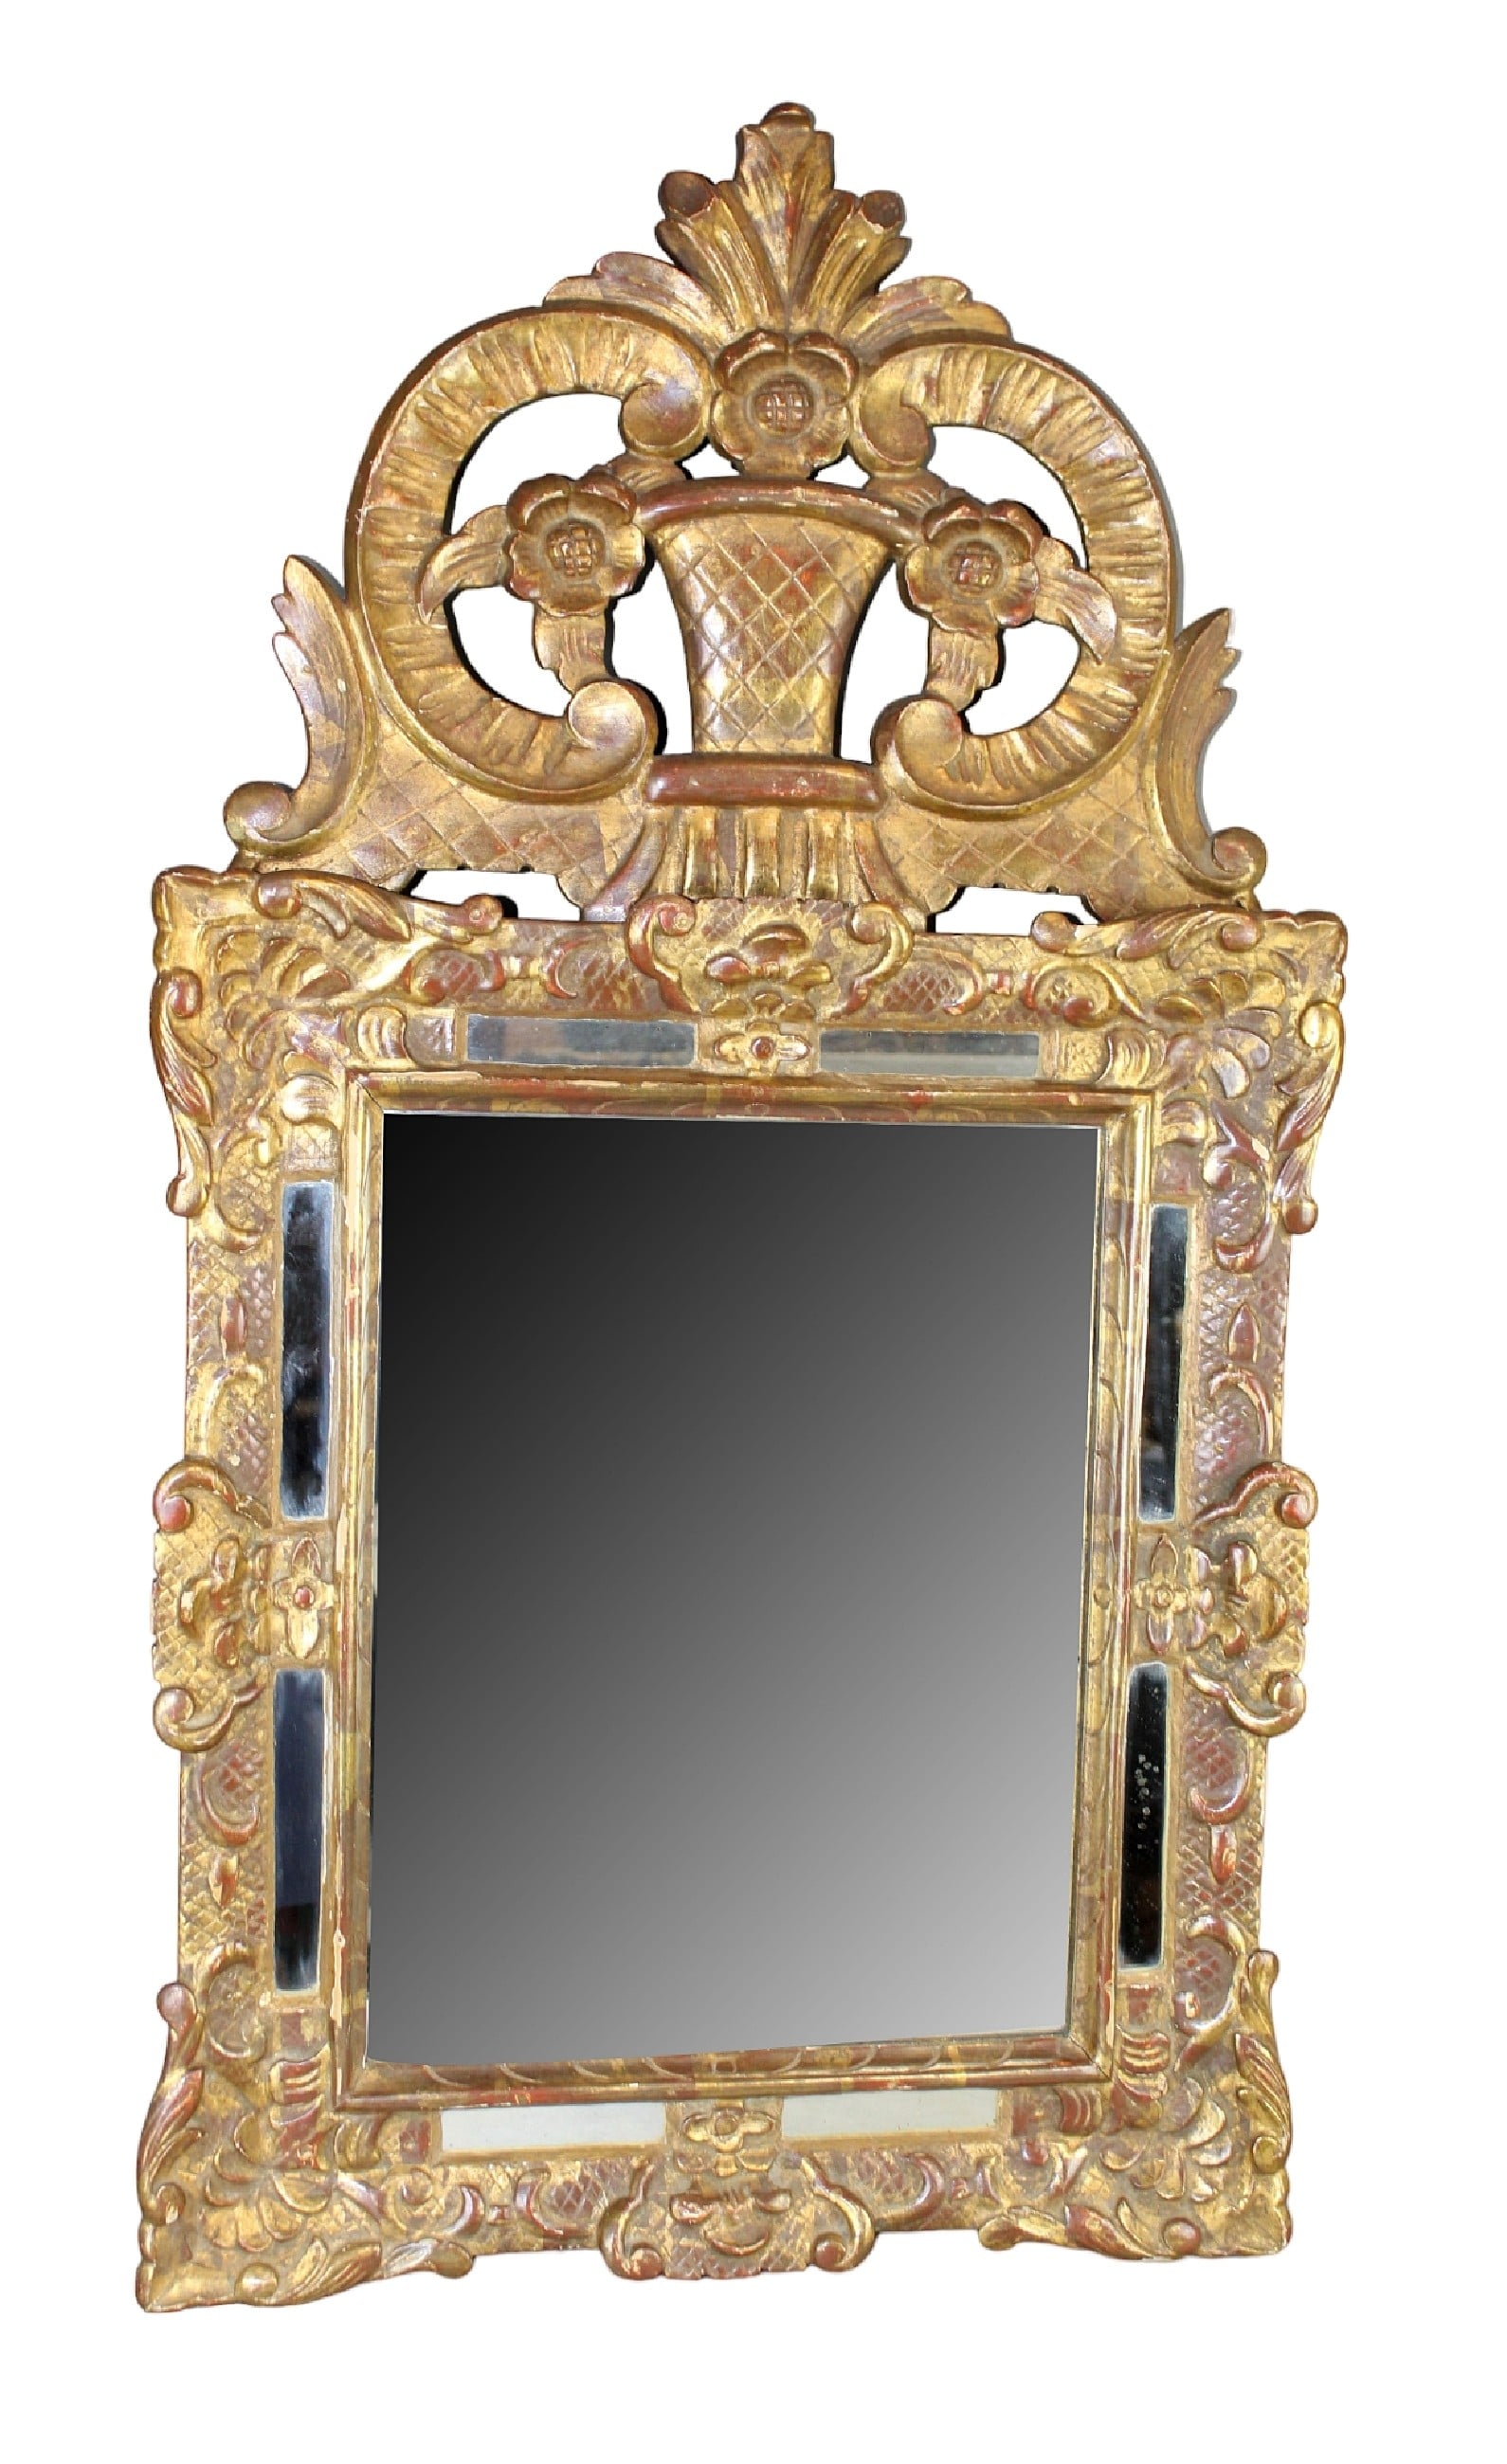 French Louis XIV style gold leaf mirror with flowering basket